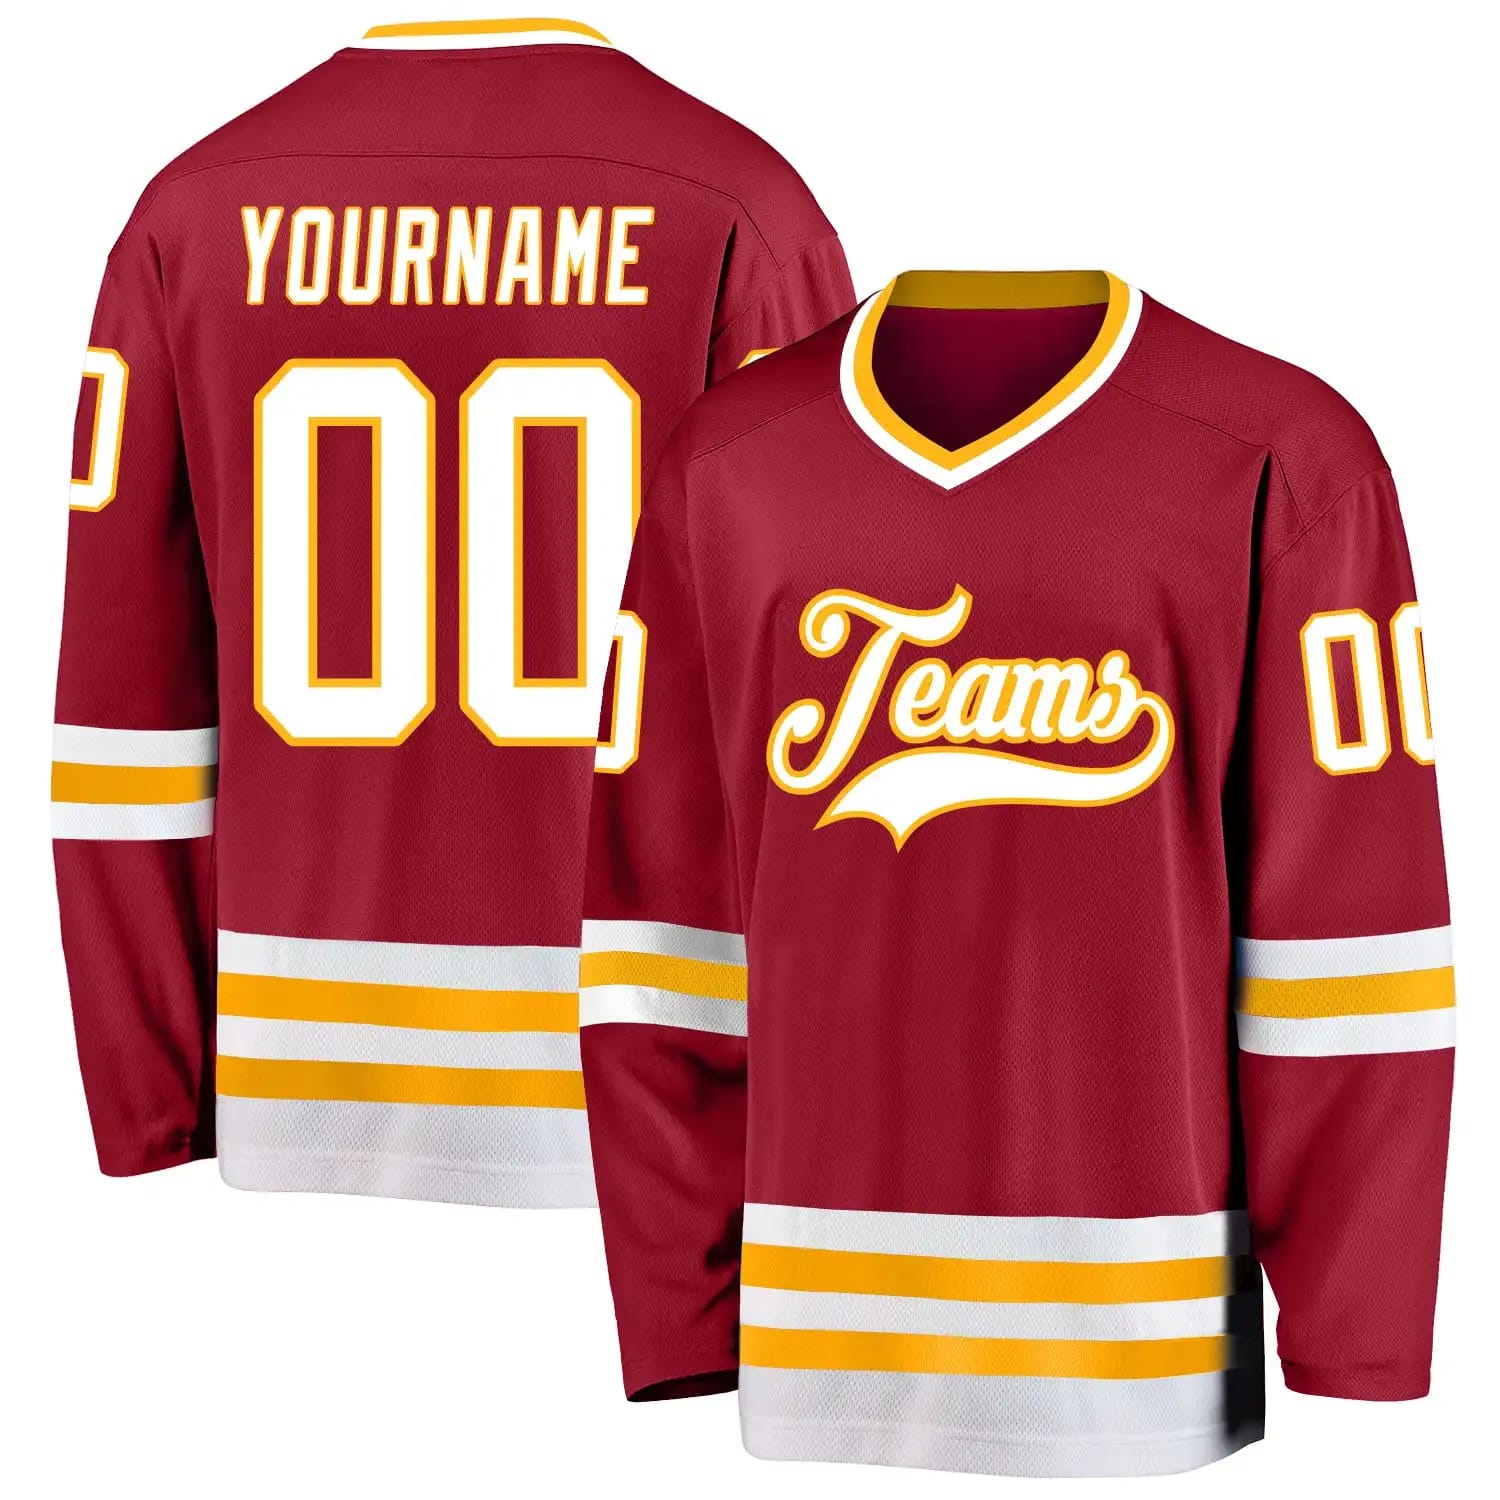 Stitched And Print Maroon White-Gold Hockey Jersey Custom